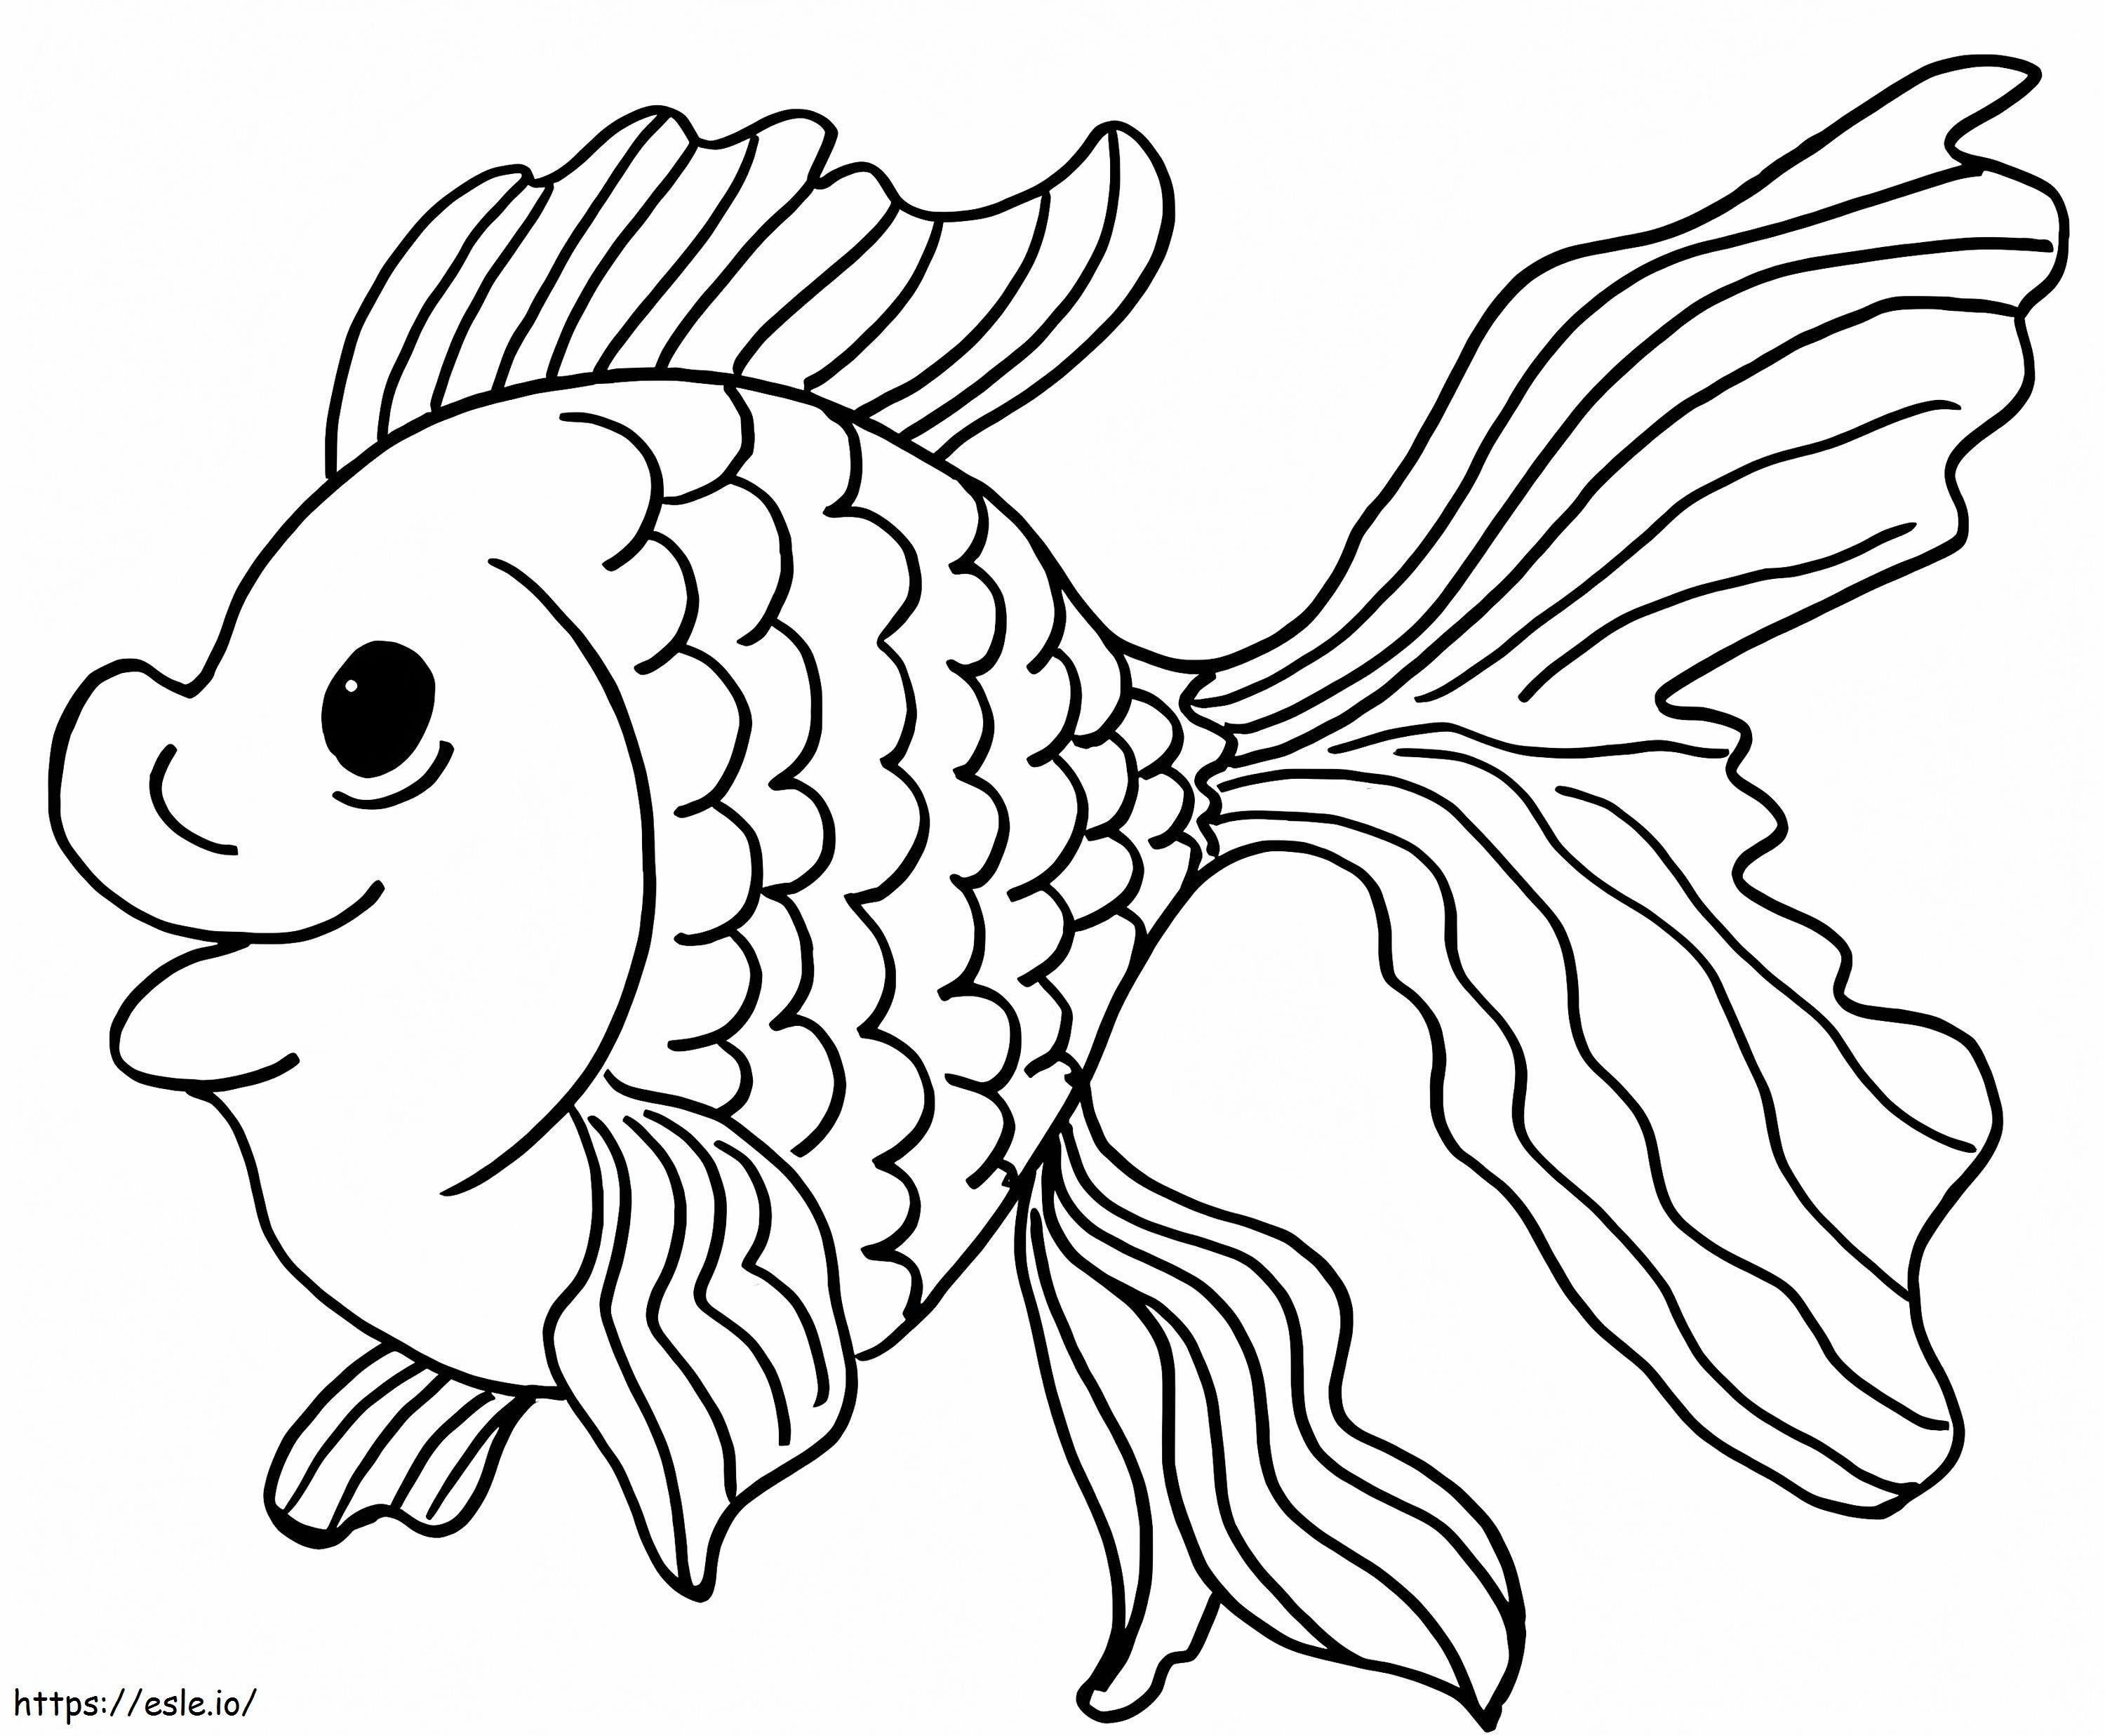 Goldfish 3 coloring page